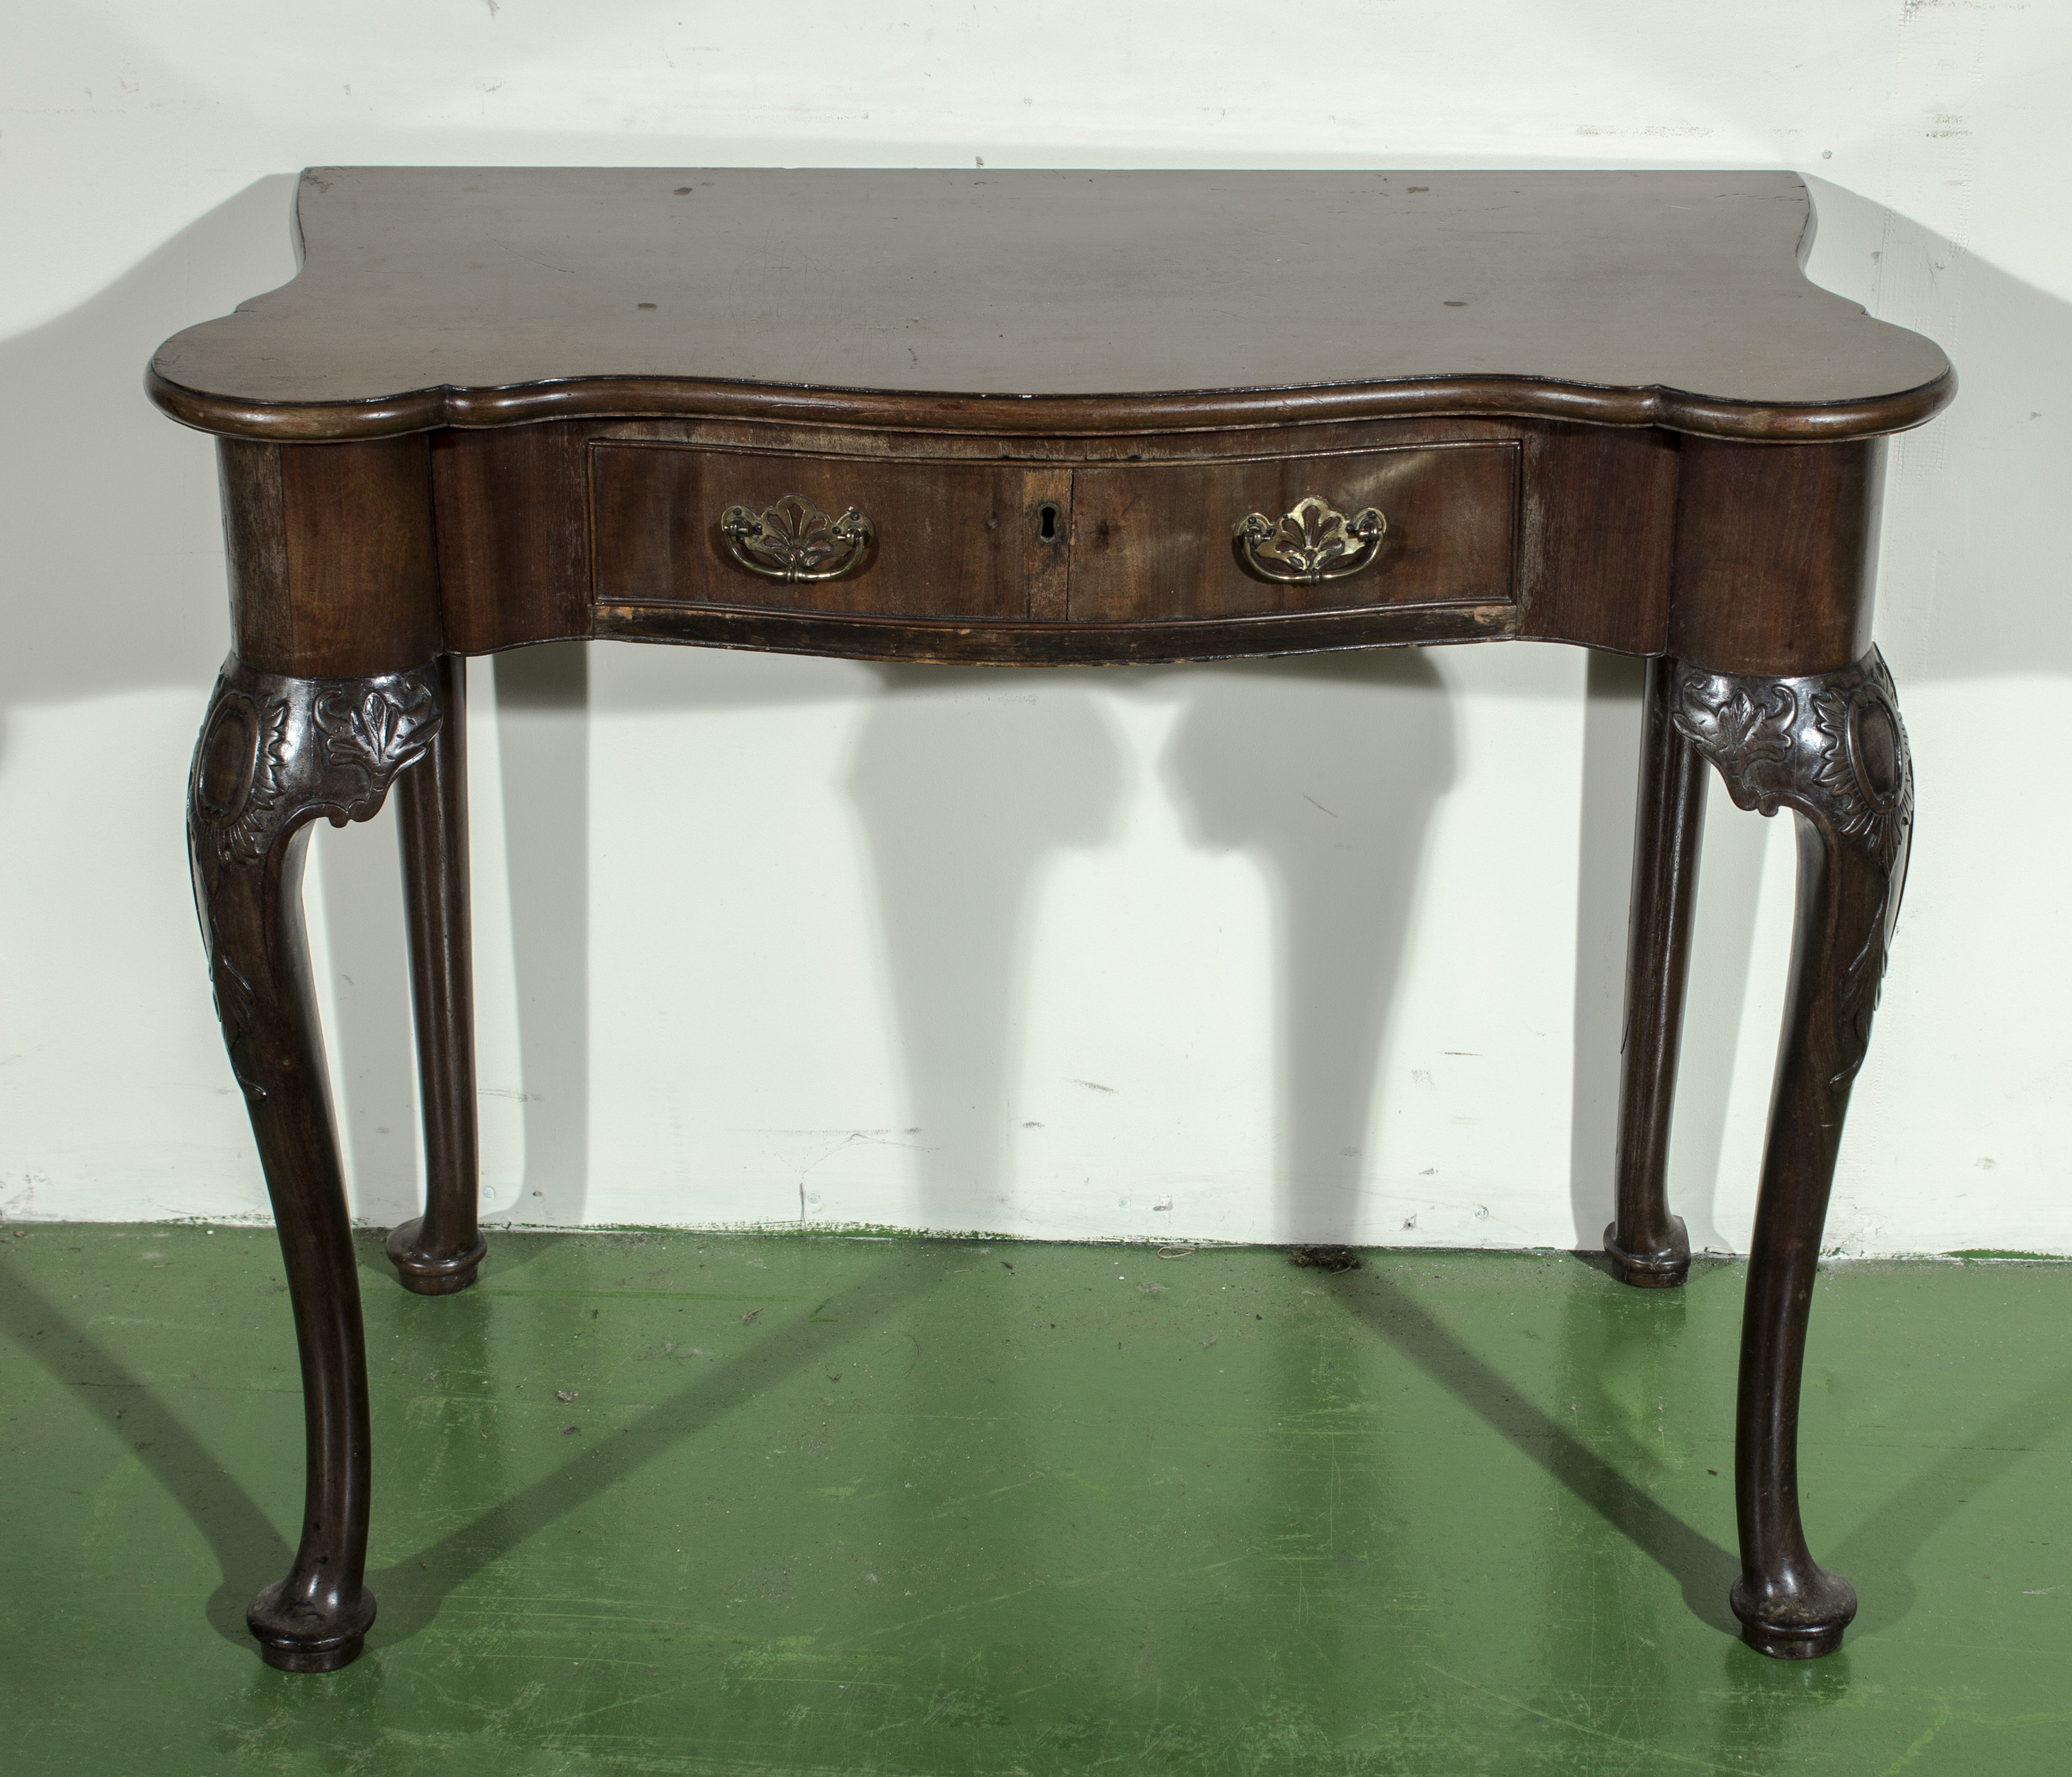 An early George III walnut, adapted side table on carved cabriole legs